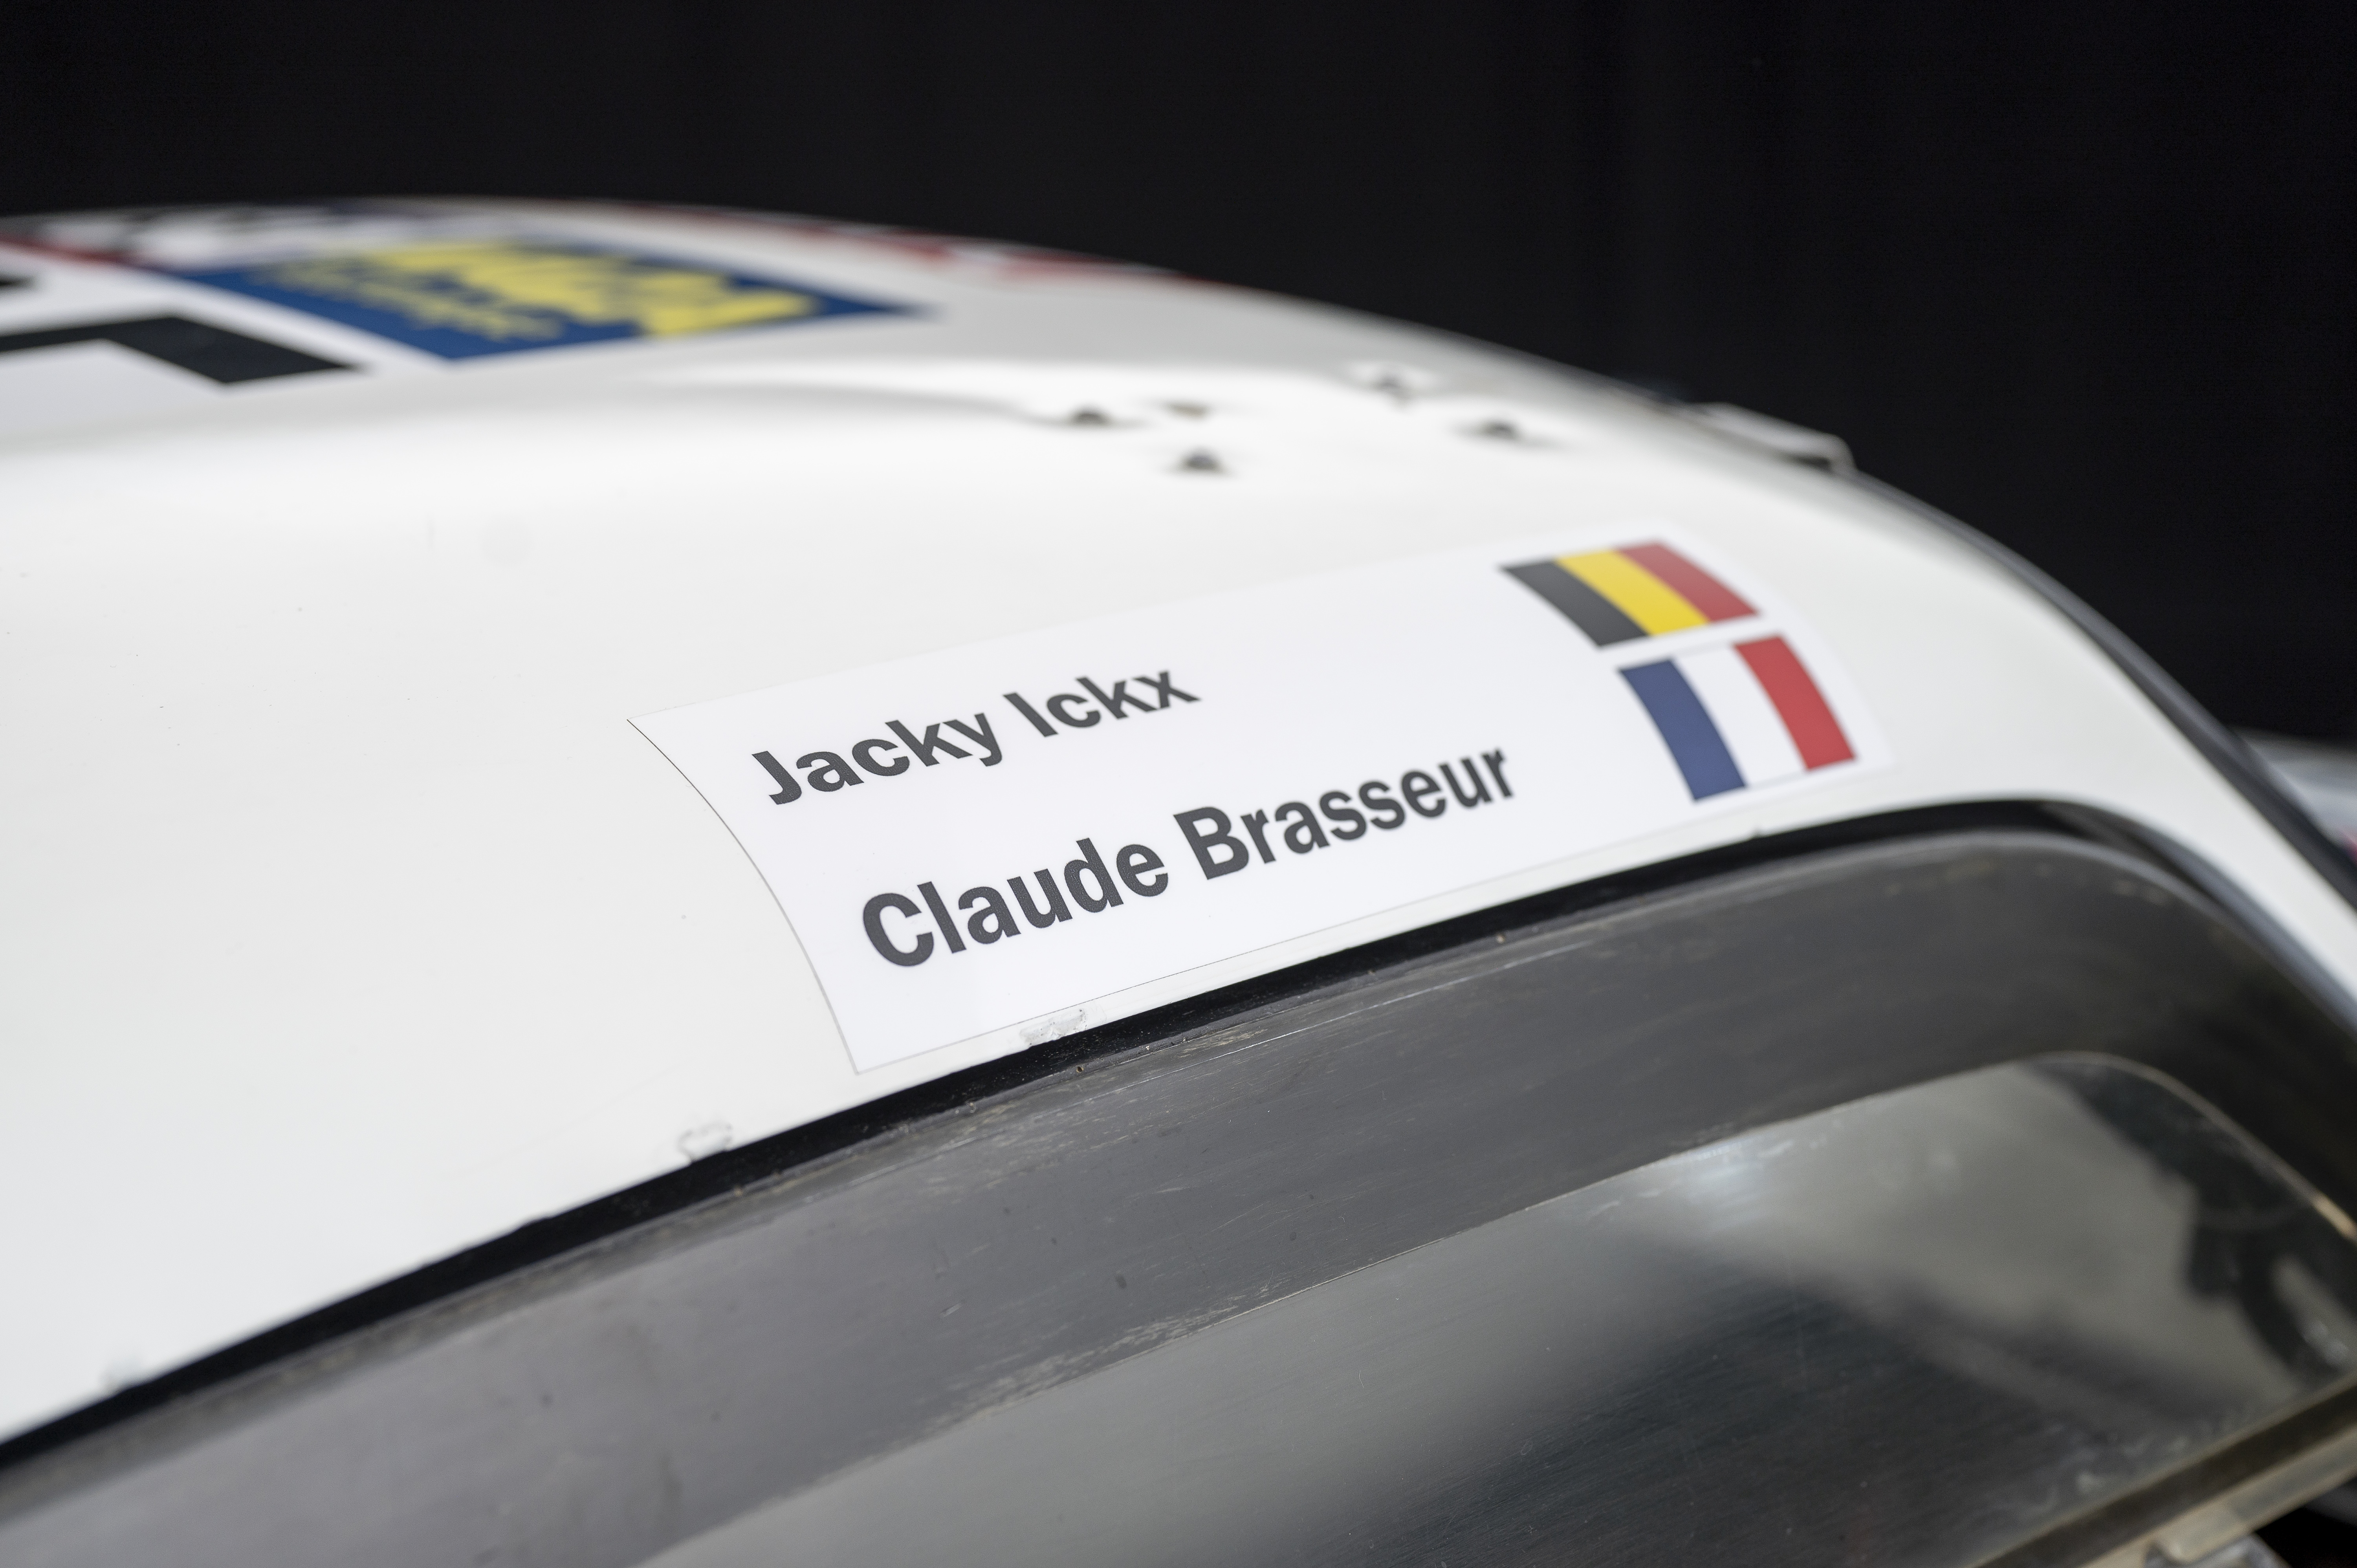 Porsche 959 roof showing Jacky Ickx and Claude Brasseur’s names